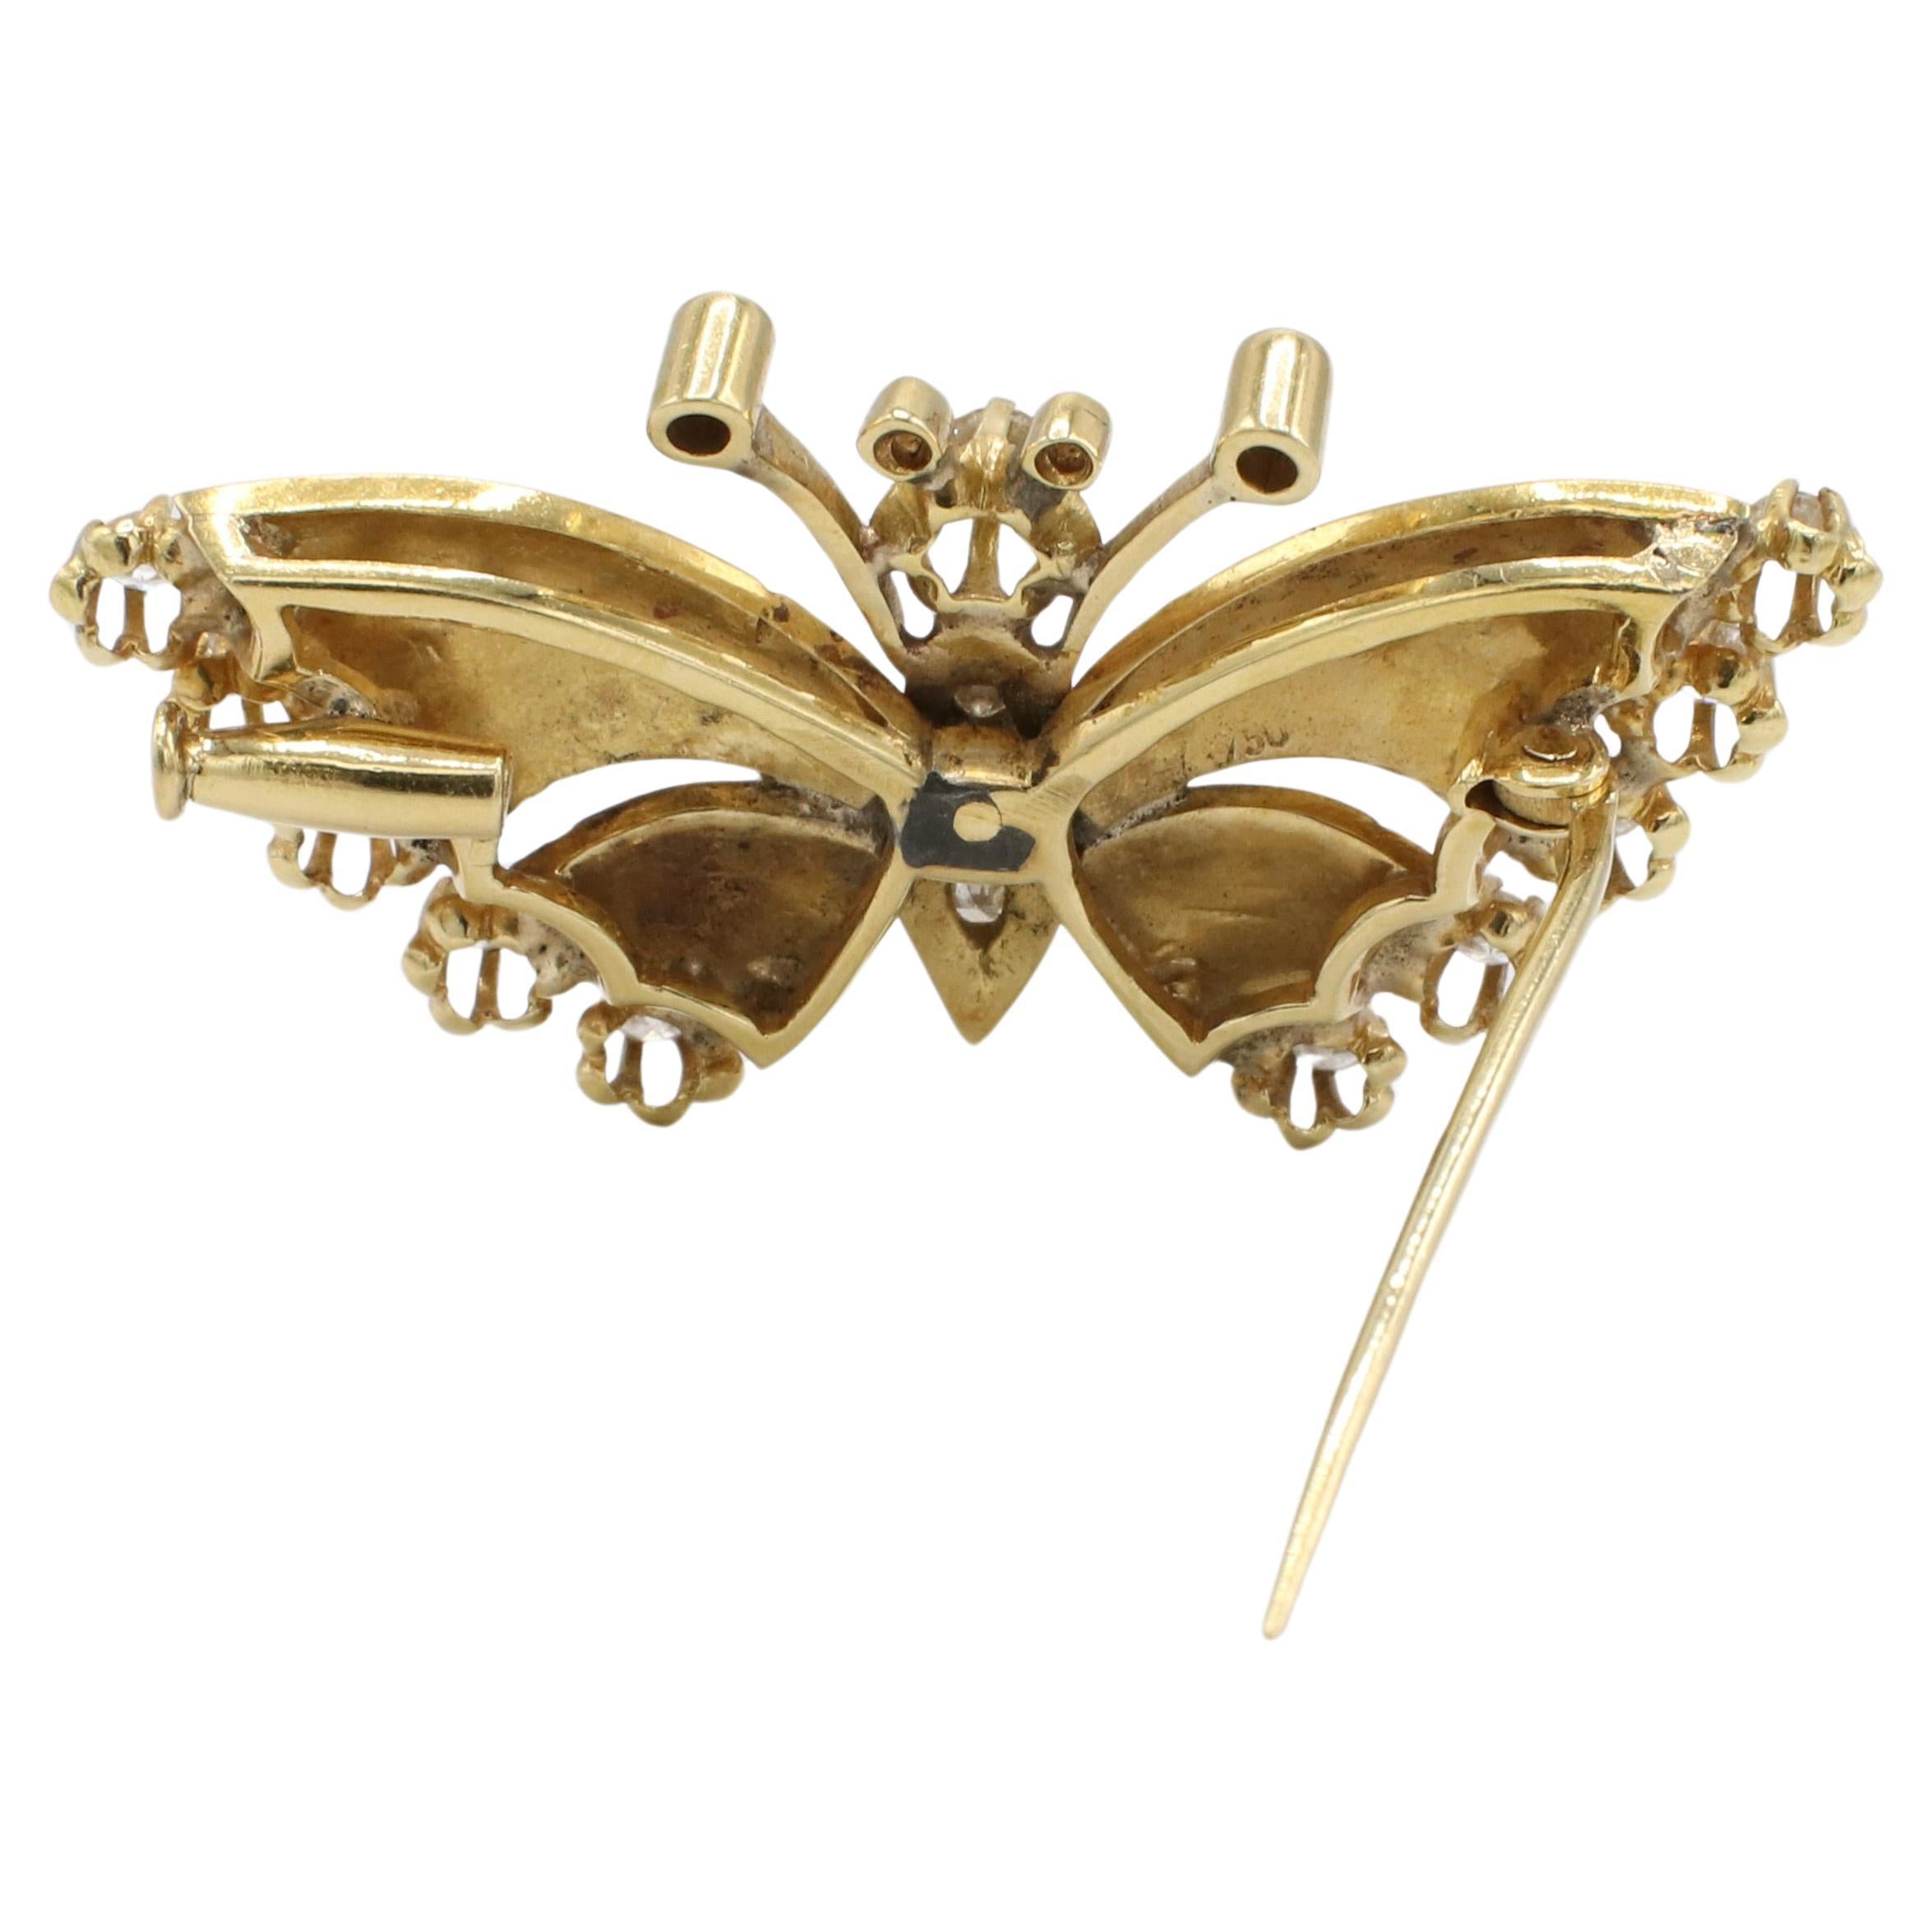 18 Karat Yellow Gold Natural Diamond & Colored Enamel Butterfly Pin Brooch
Metal: 18k yellow gold
Weight: 12.4 grams
Dimensions: 45.5 x 24mm
Diamonds: Approx. .75 CTW natural round diamonds H-I VS

